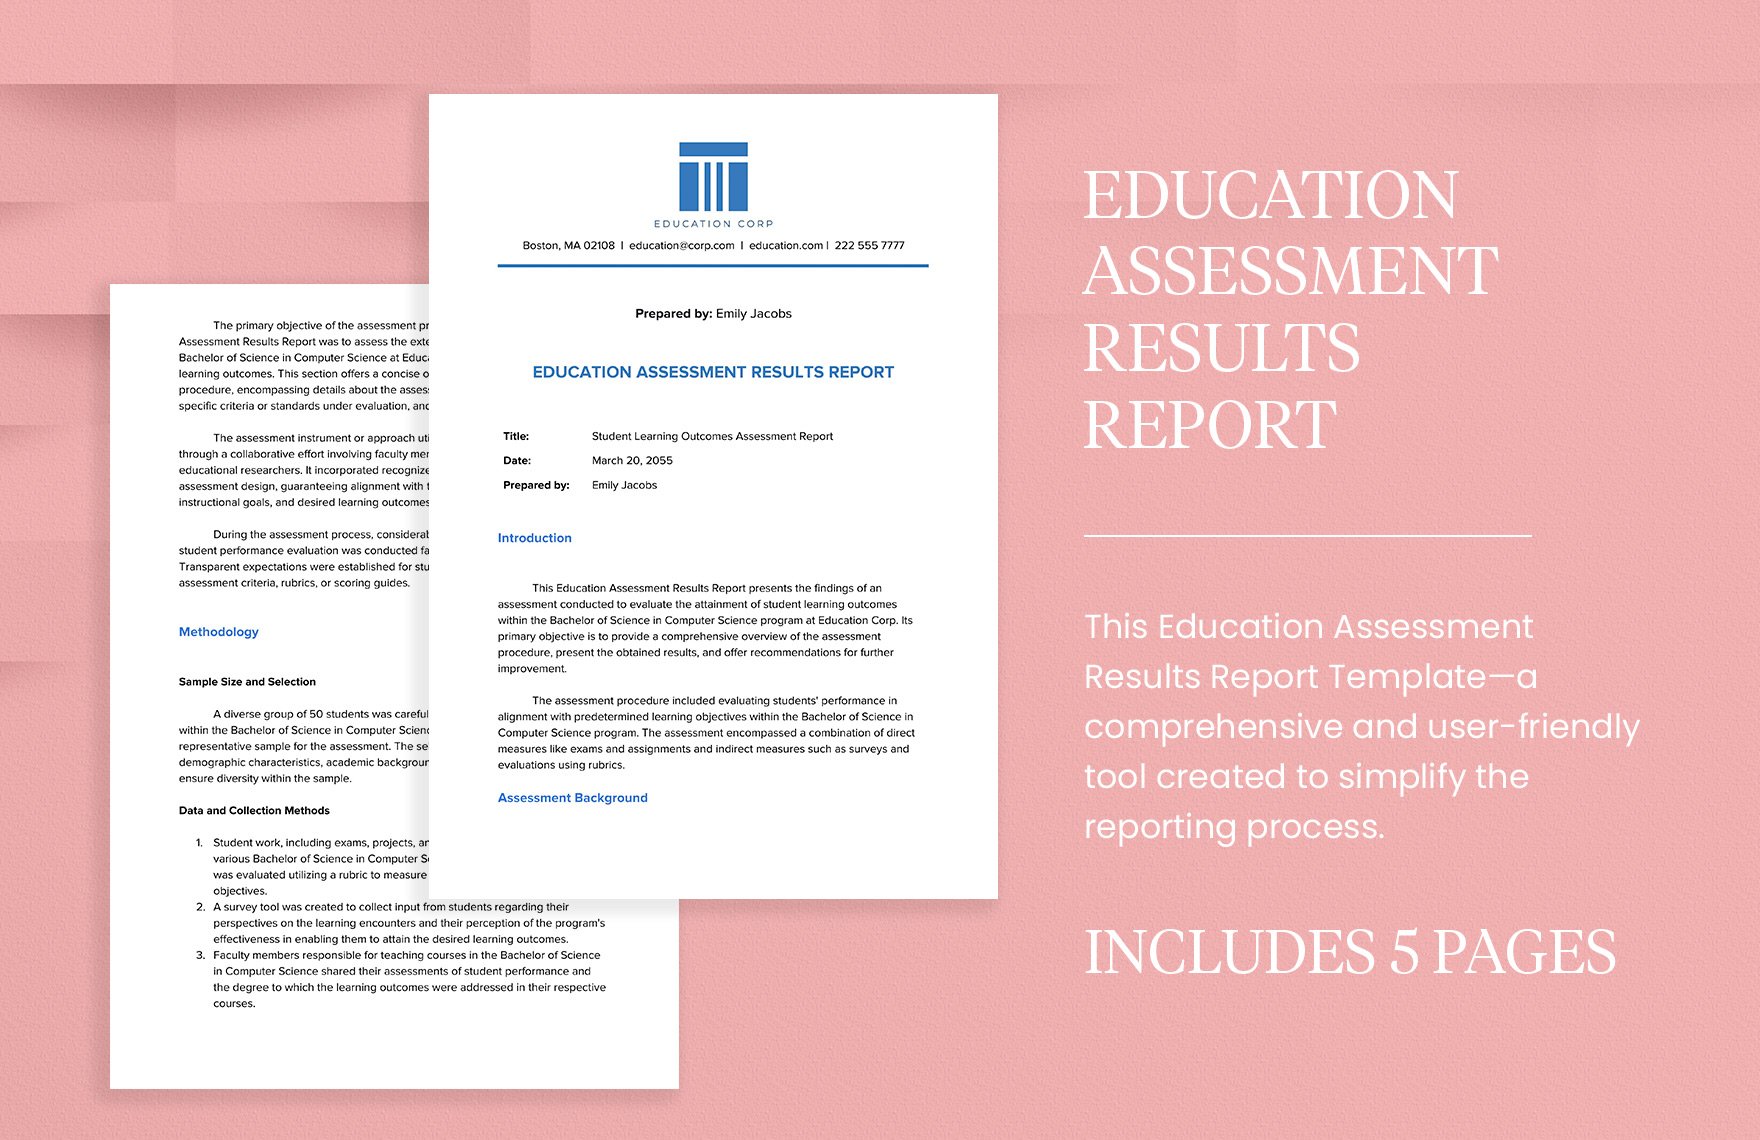 Education Assessment Results Report 